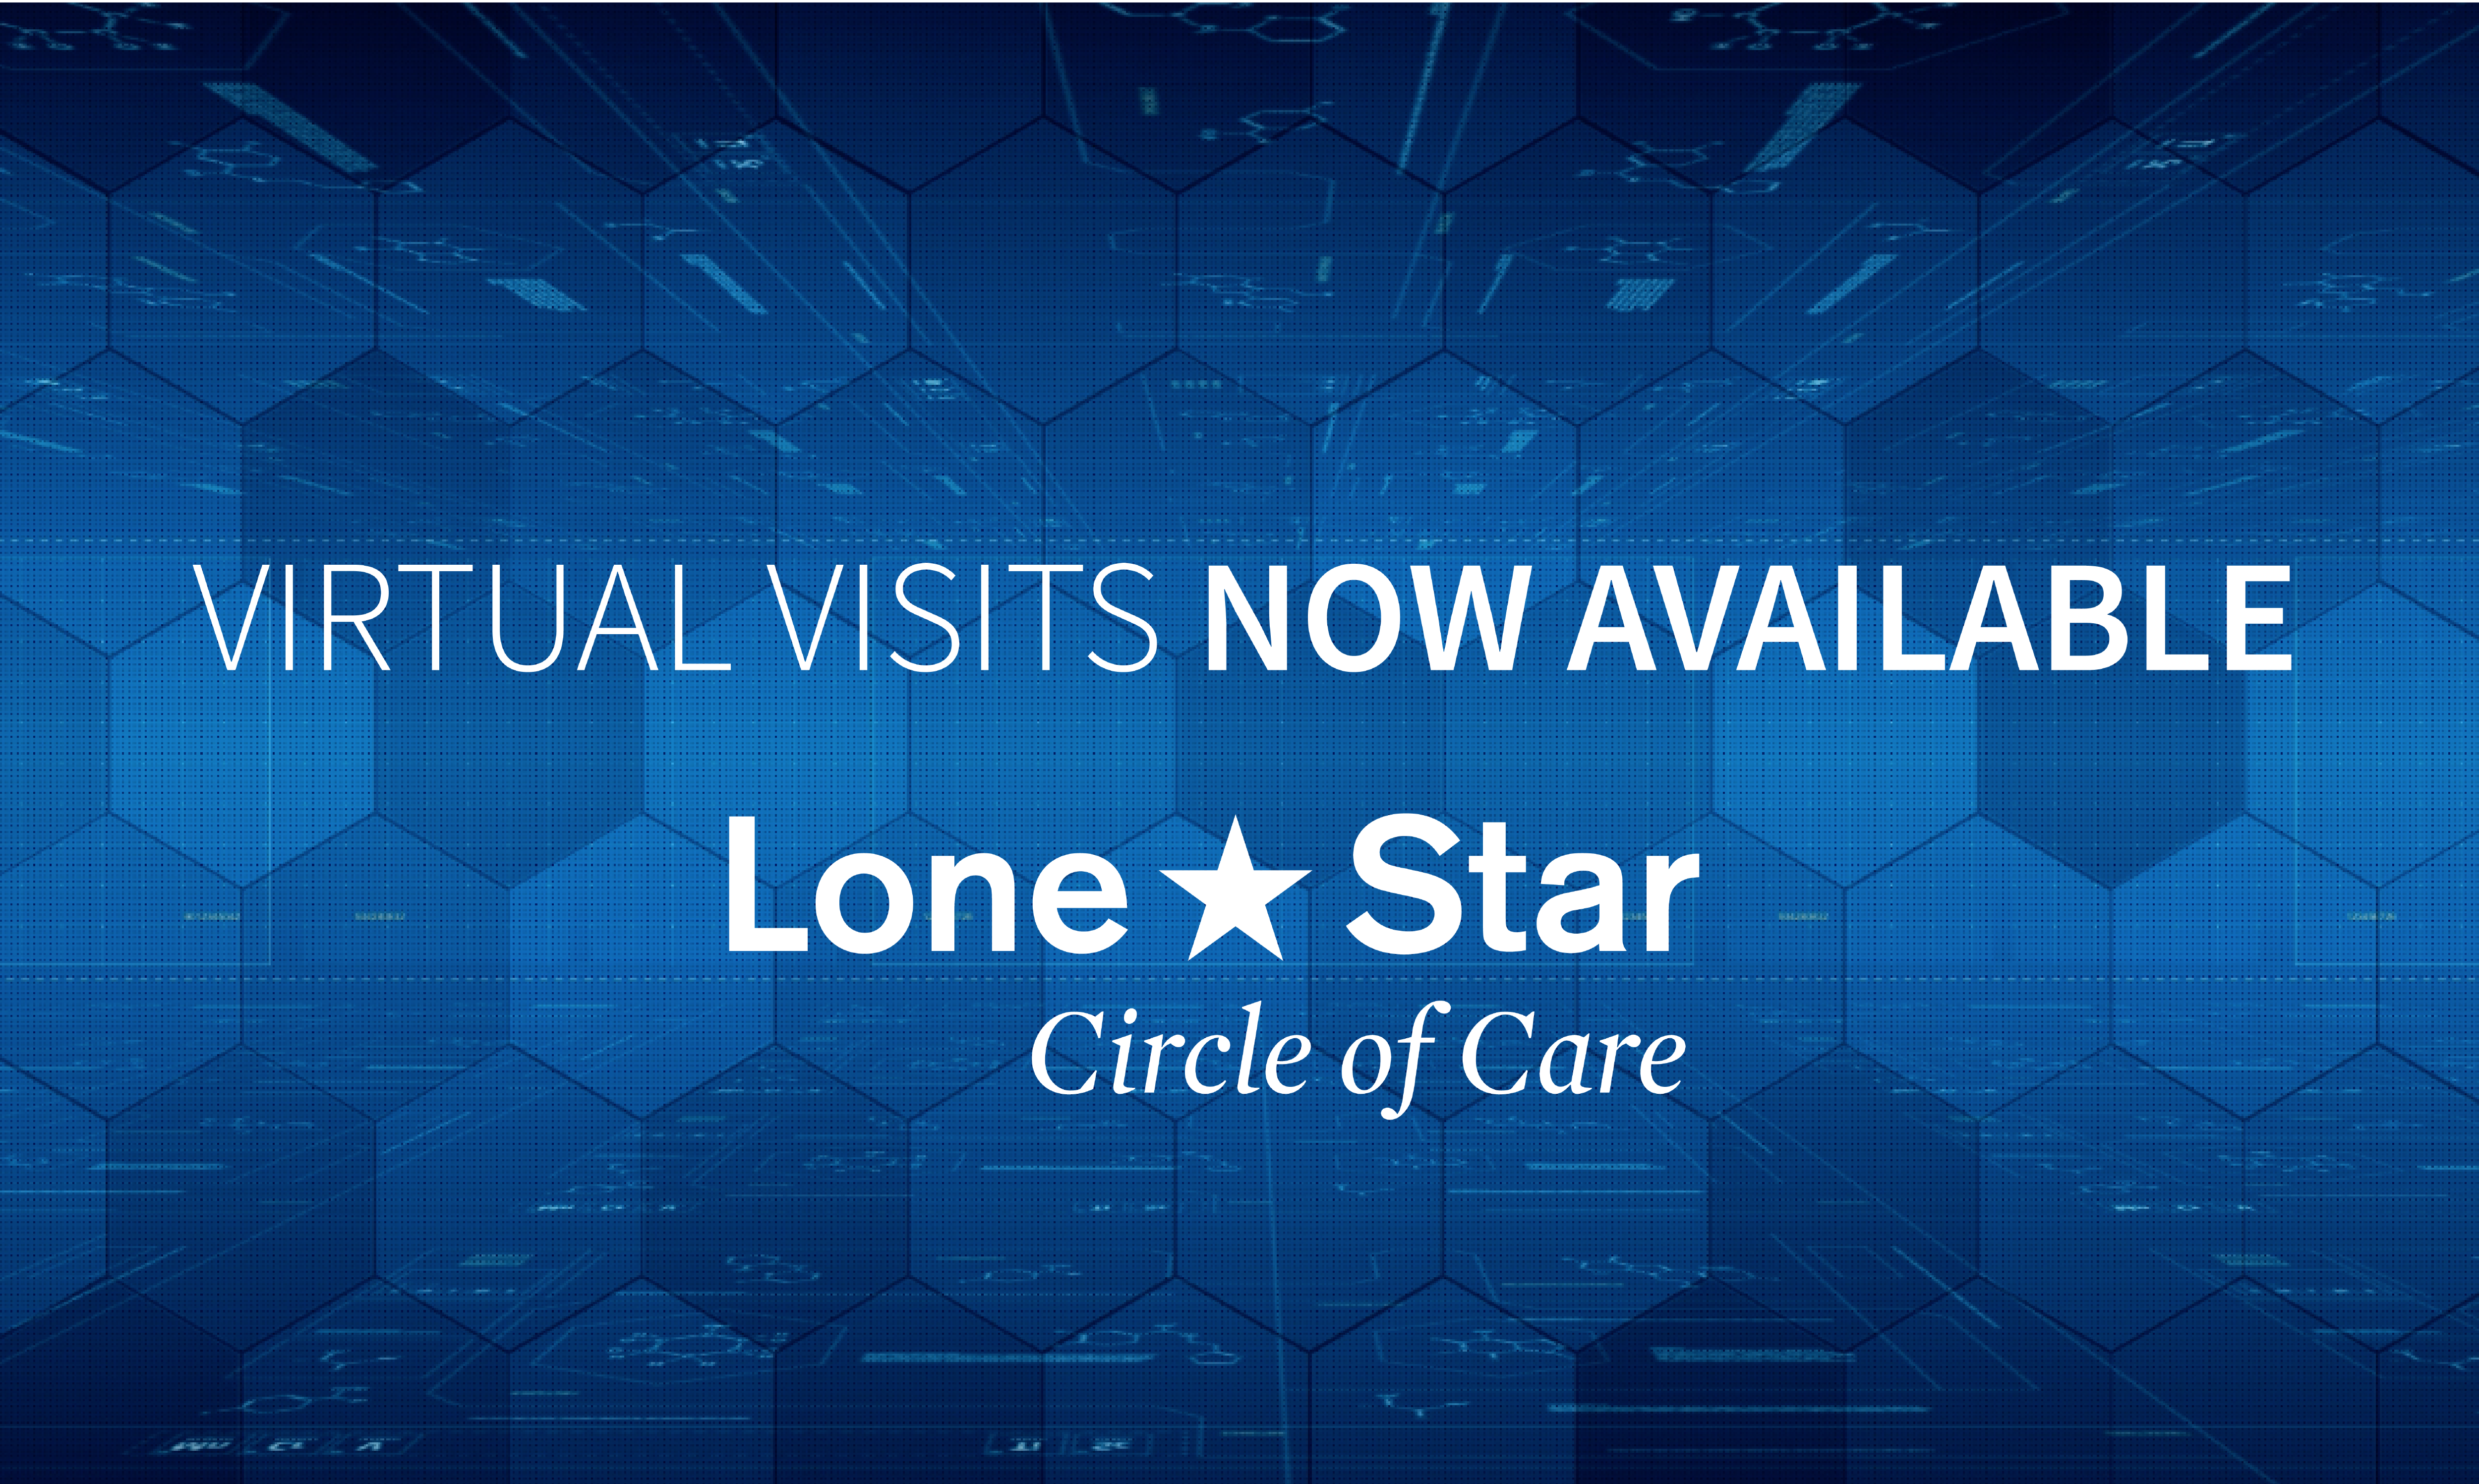 24/7 Care is Here. Hello Virtual Visits.